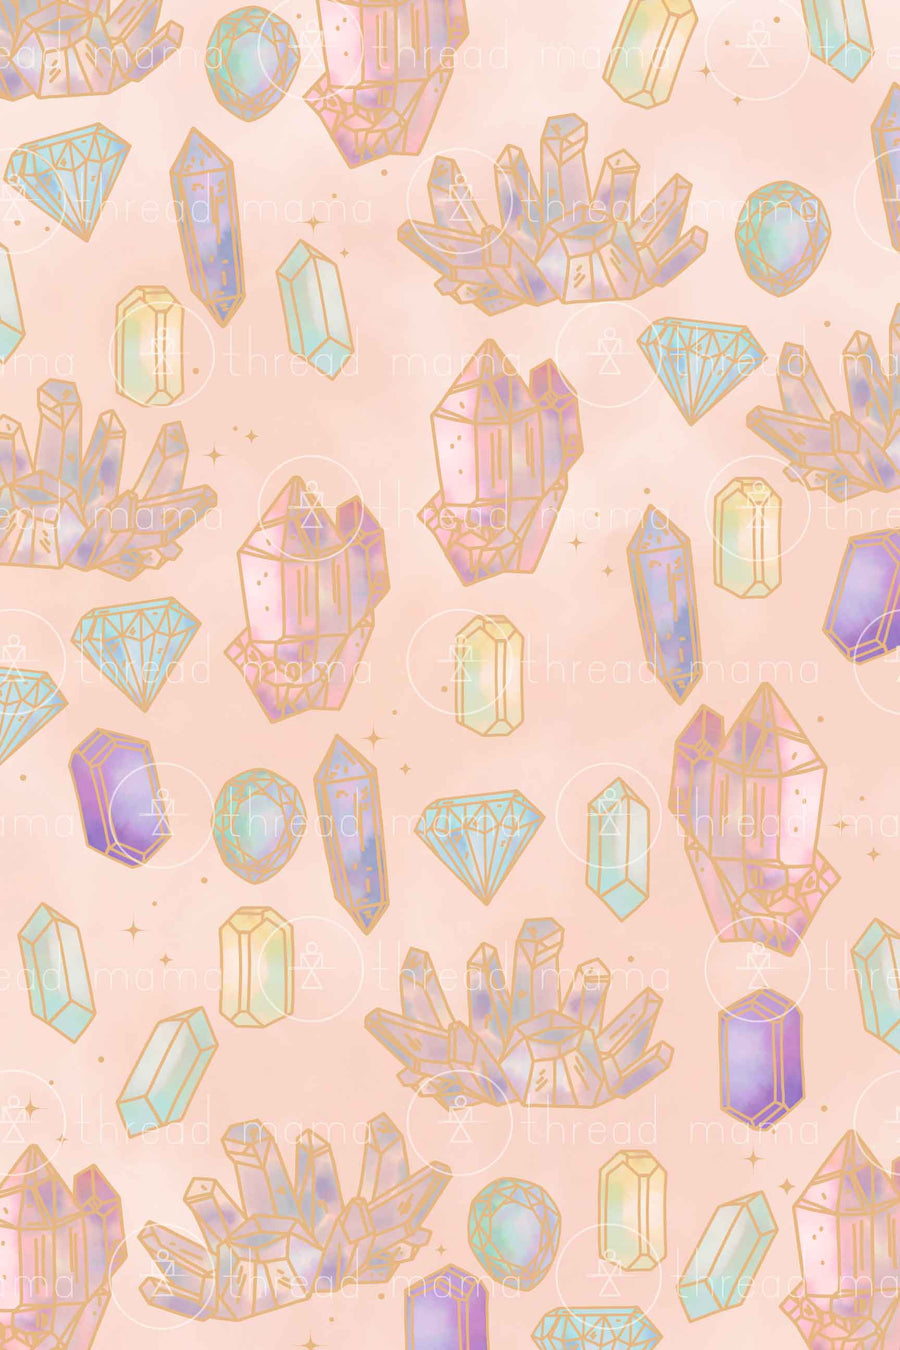 Background Pattern #12 (Printable Poster)